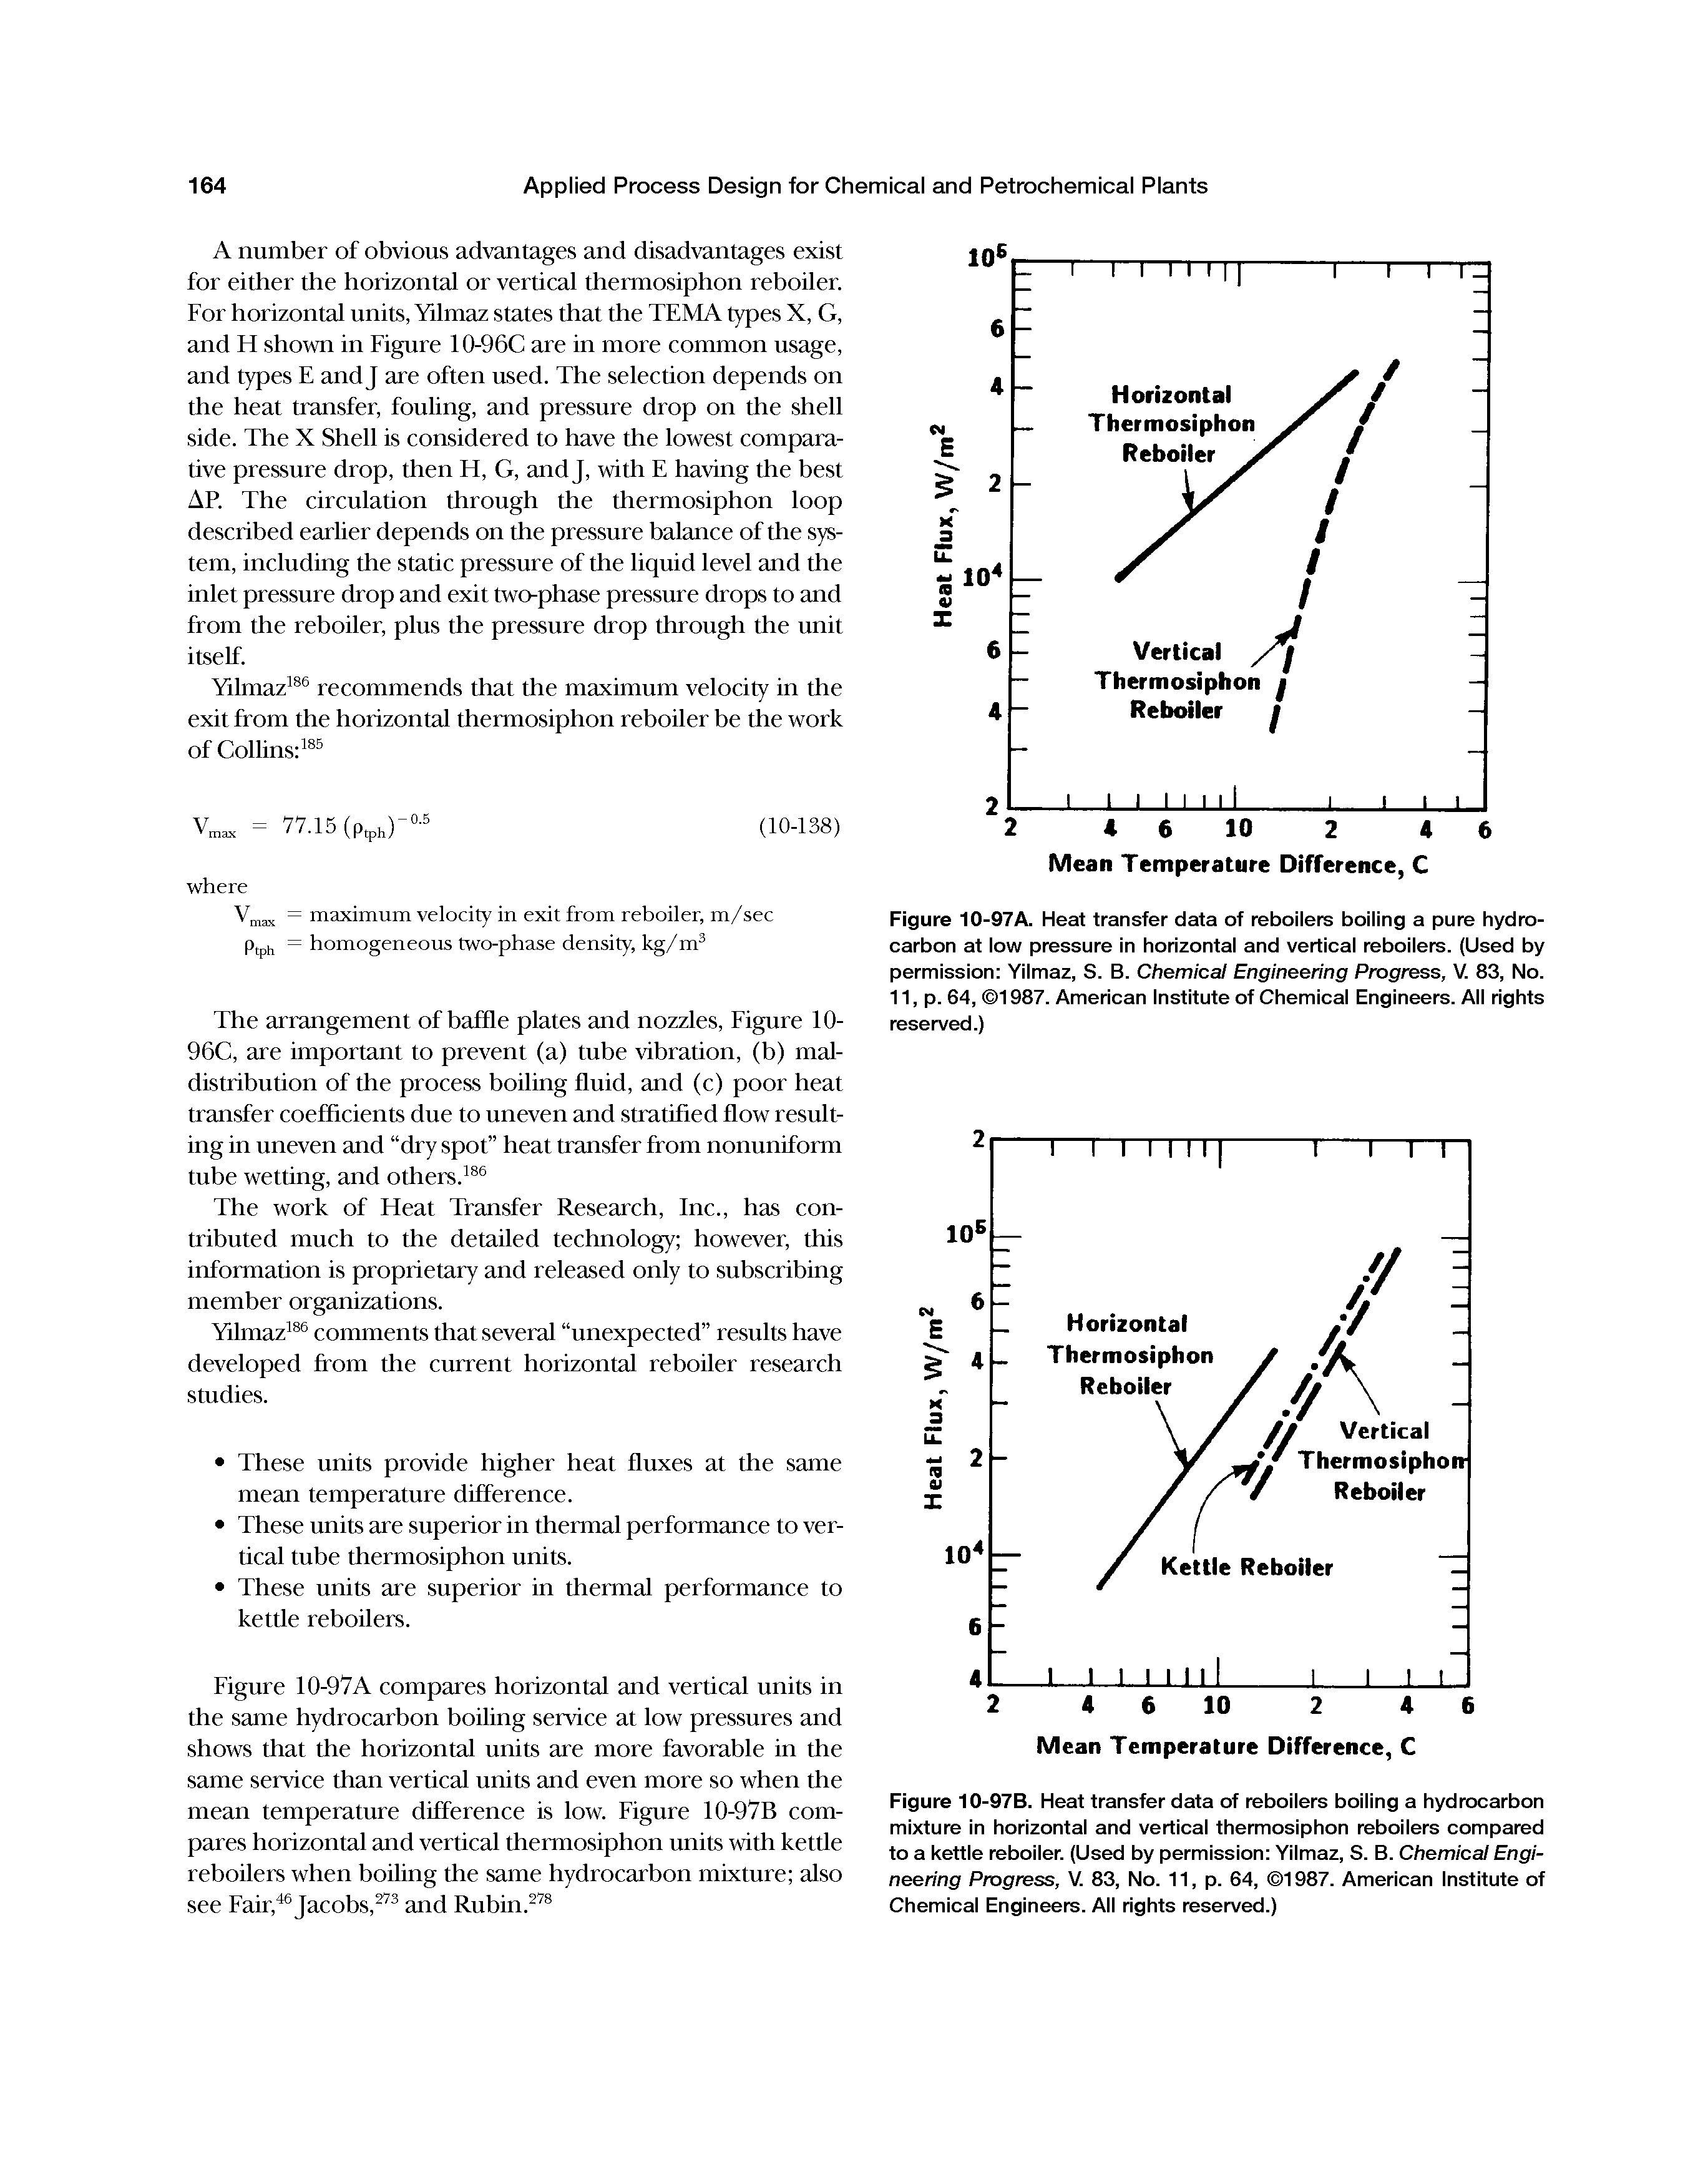 Figure 10-97A. Heat transfer data of reboilers boiling a pure hydrocarbon at low pressure in horizontal and vertical reboilers. (Used by permission Yilmaz, S. B. Chemical Engineering Progress, V. 83, No. 11, p. 64, 1987. American Institute of Chemical Engineers. All rights reserved.)...